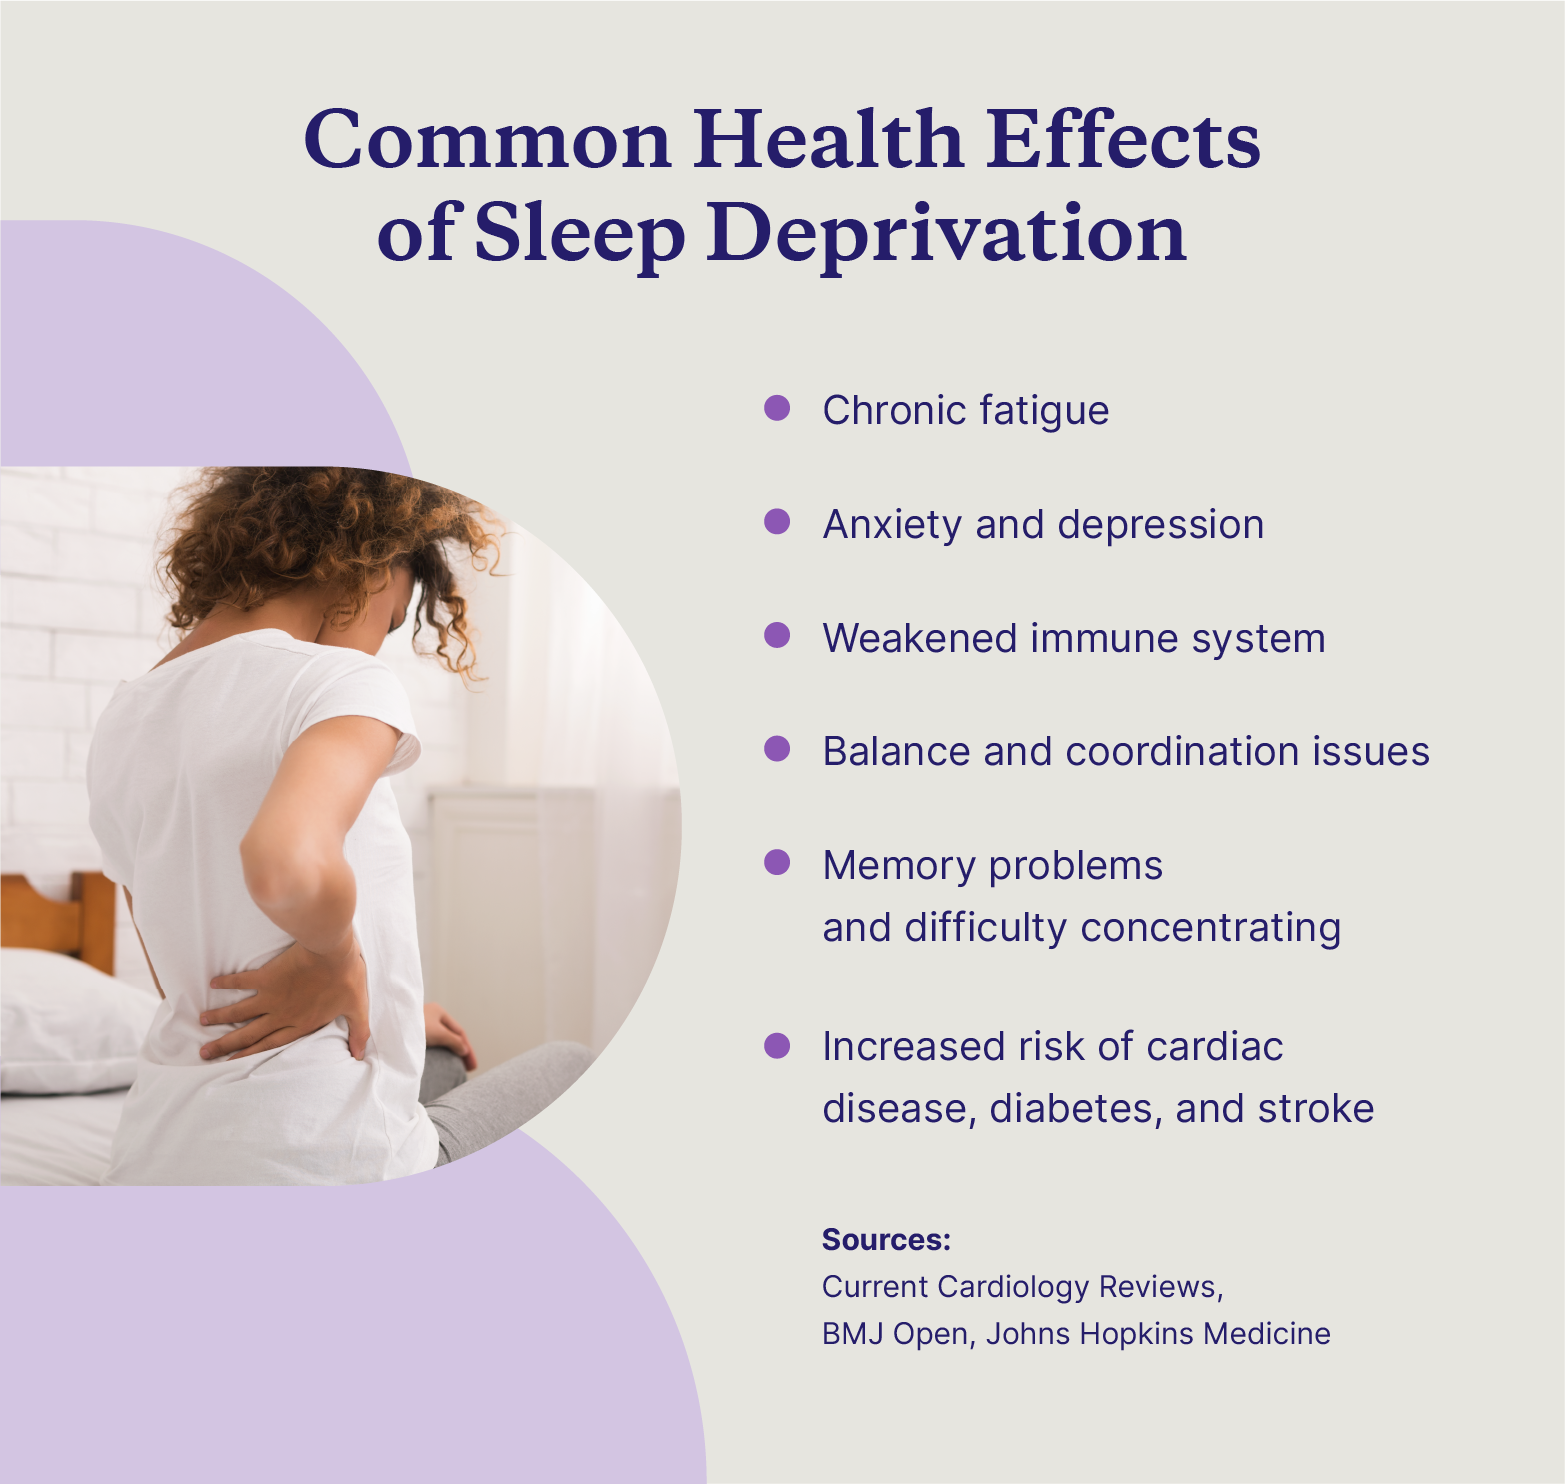 Graphic describing potential health effects of sleep deprivation from sleeping on a bad mattress.